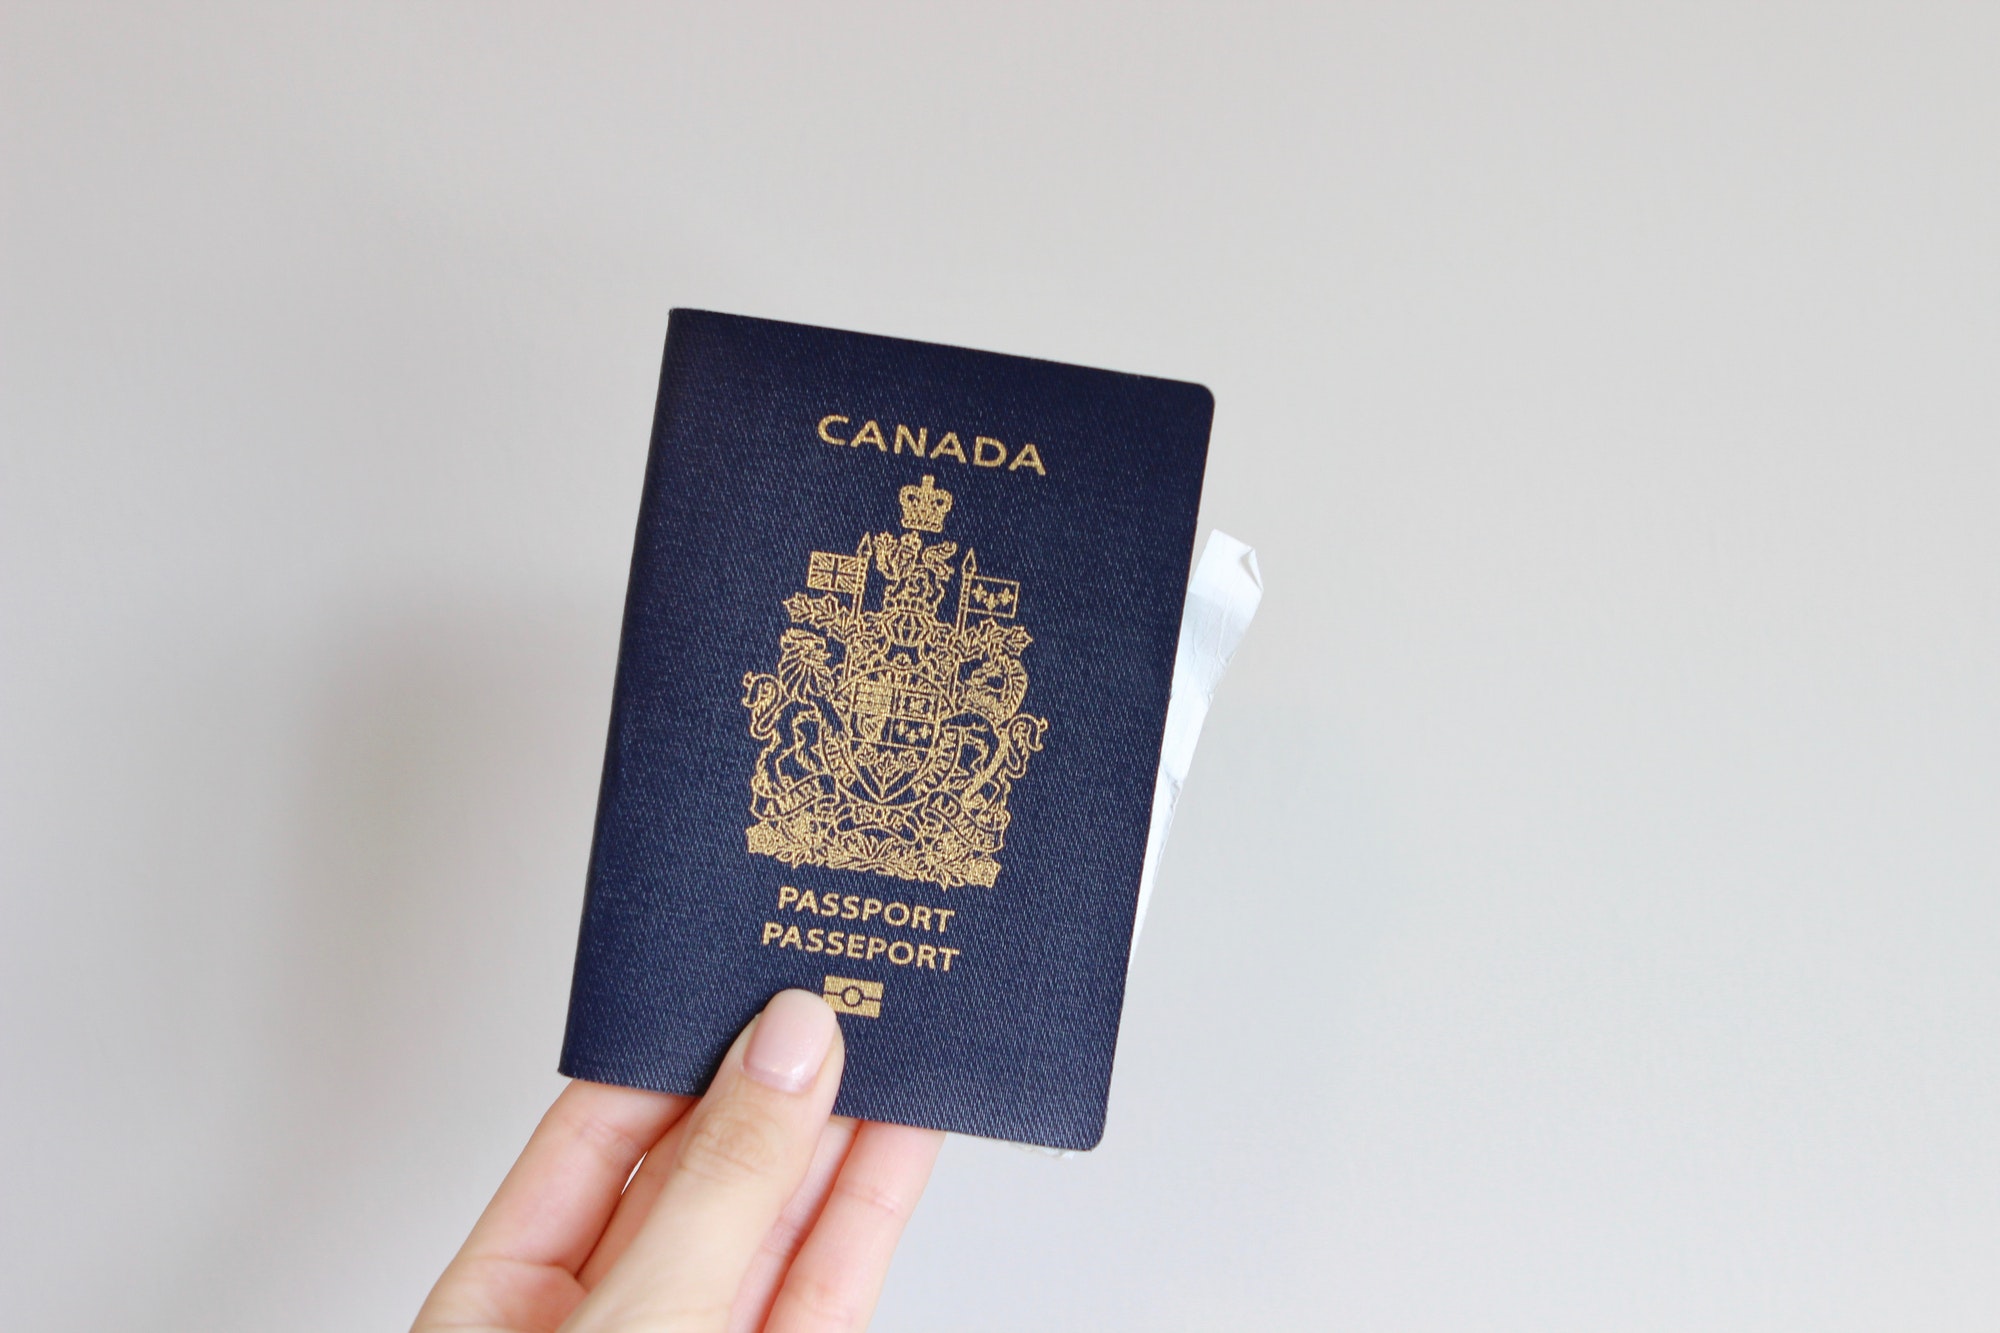 Woman’s hand holding a Canadian passport in front of white background